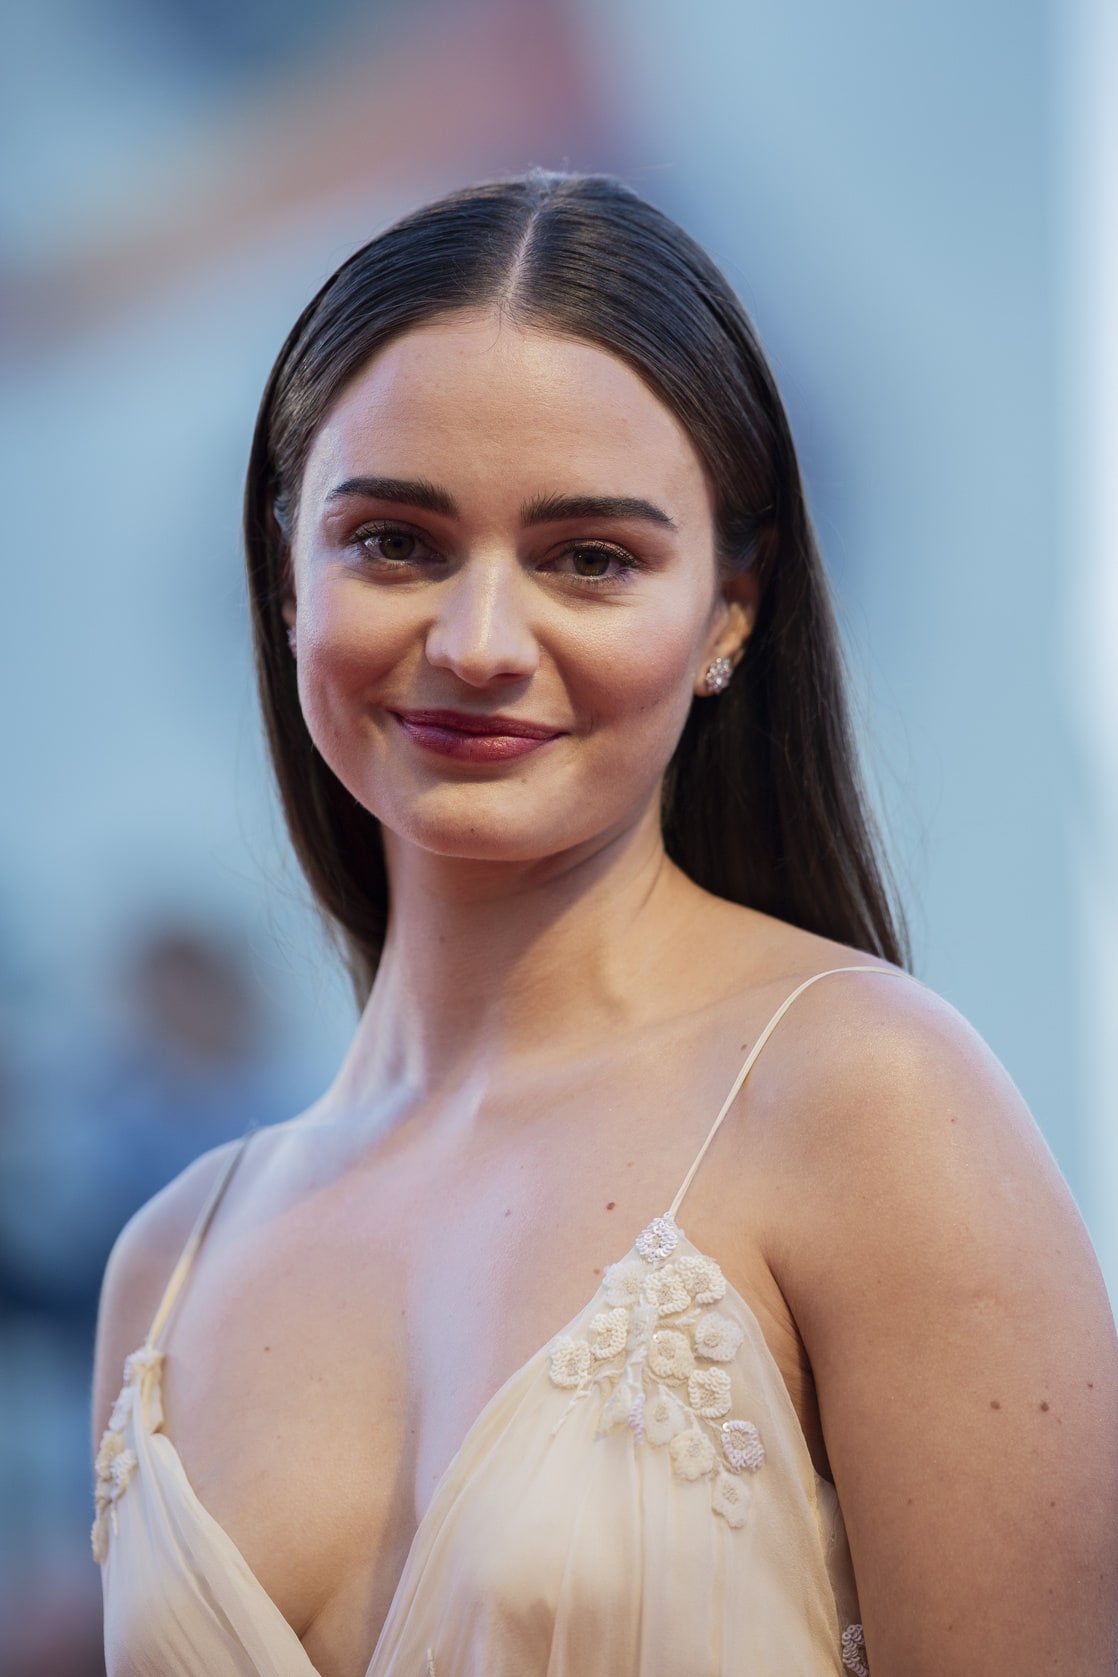 Hot aisling franciosi How to